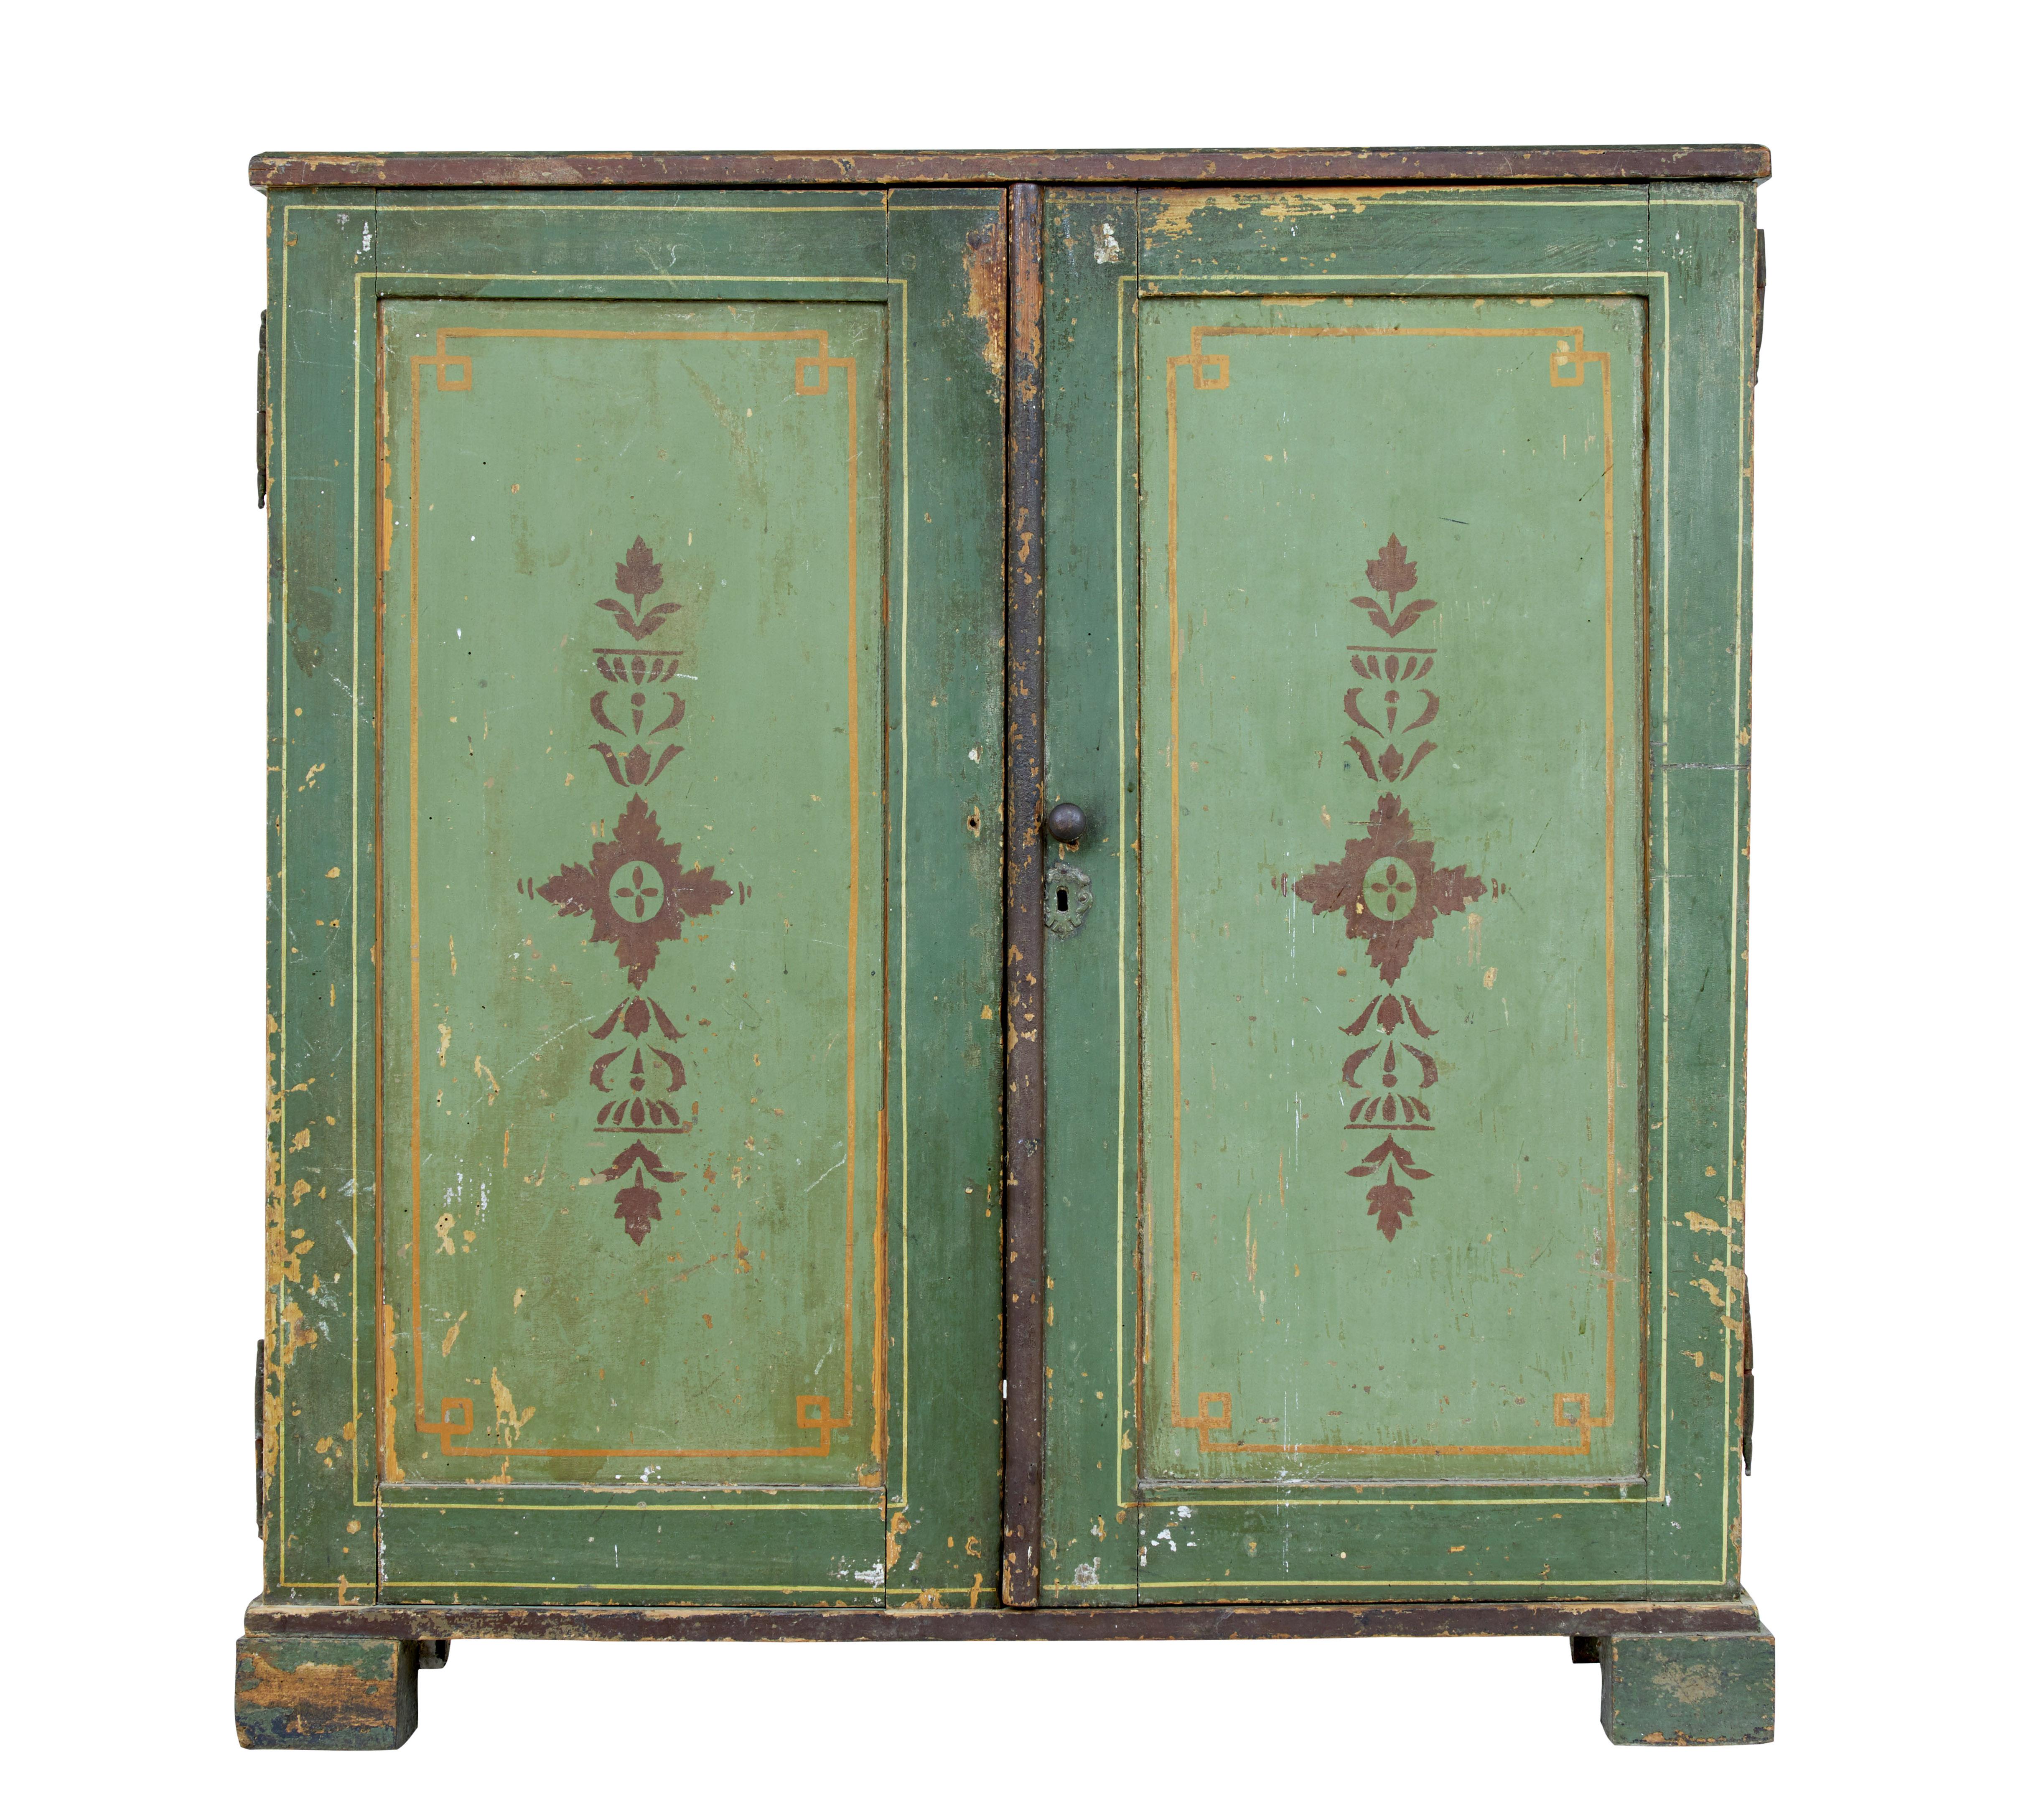 Beautiful decorative Scandinavian cabinet circa 1850.

Green 2-tone original paint with gold string design and stenciled motif to the door fronts. Double doors open to reveal 2 fitted drawers below the top surface and 2 fixed shelves.

Standing